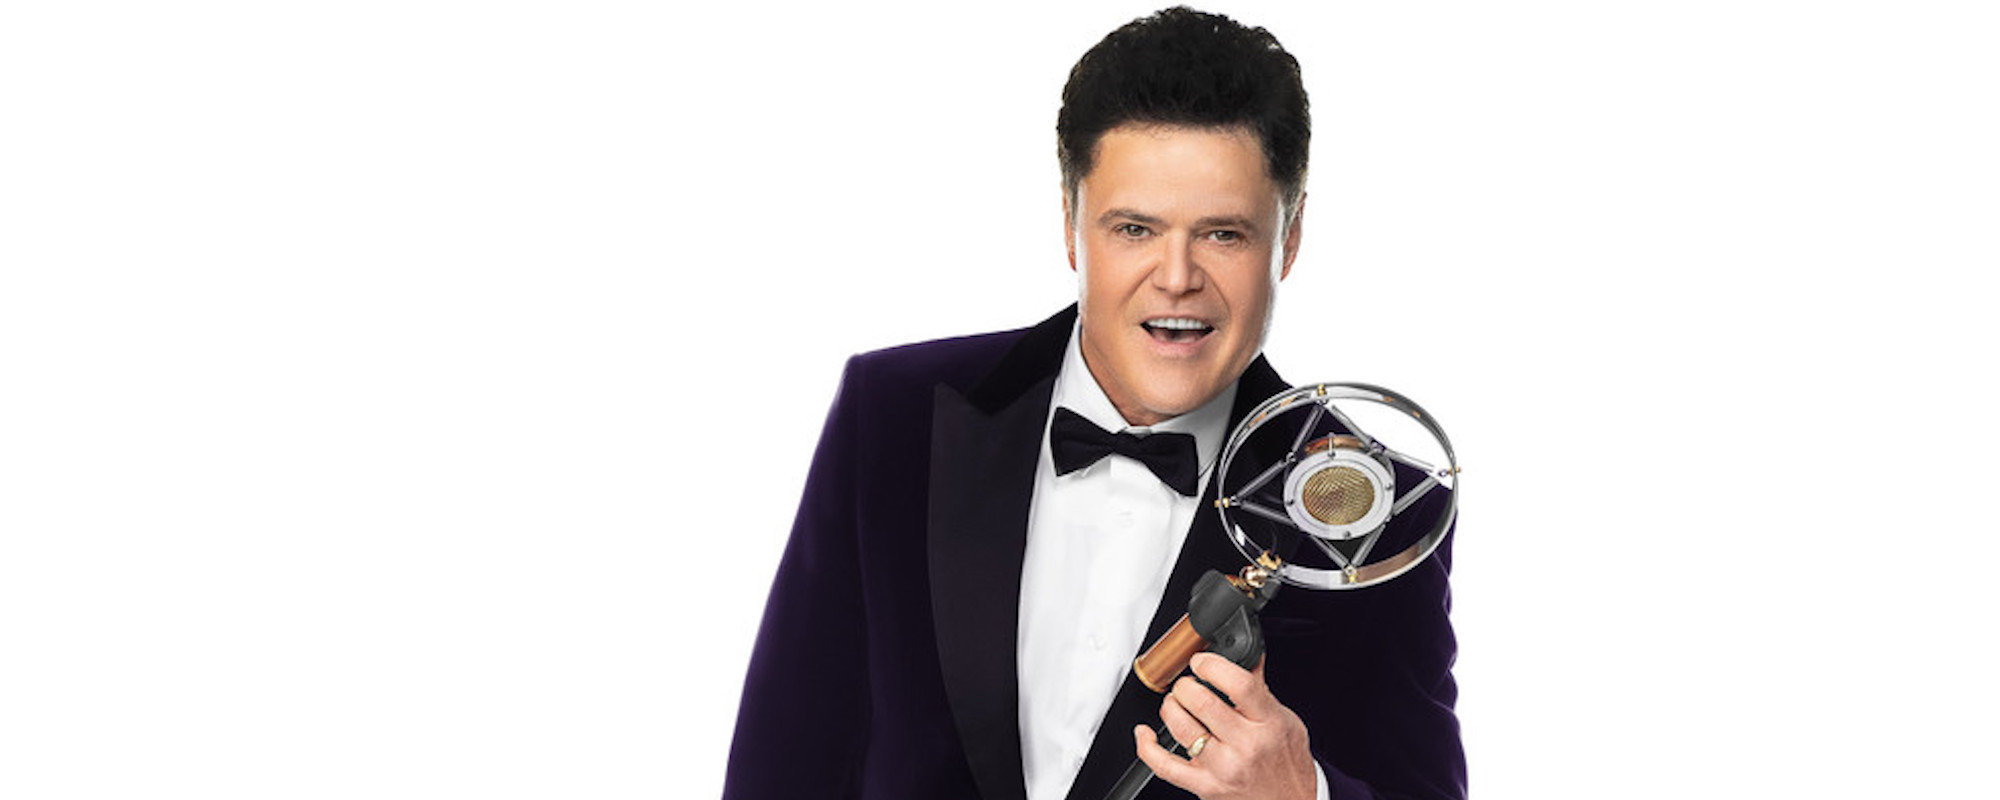 Donny Osmond’s New Beginning with Las Vegas Residency, and How Justin Bieber Inspired His 65th Album